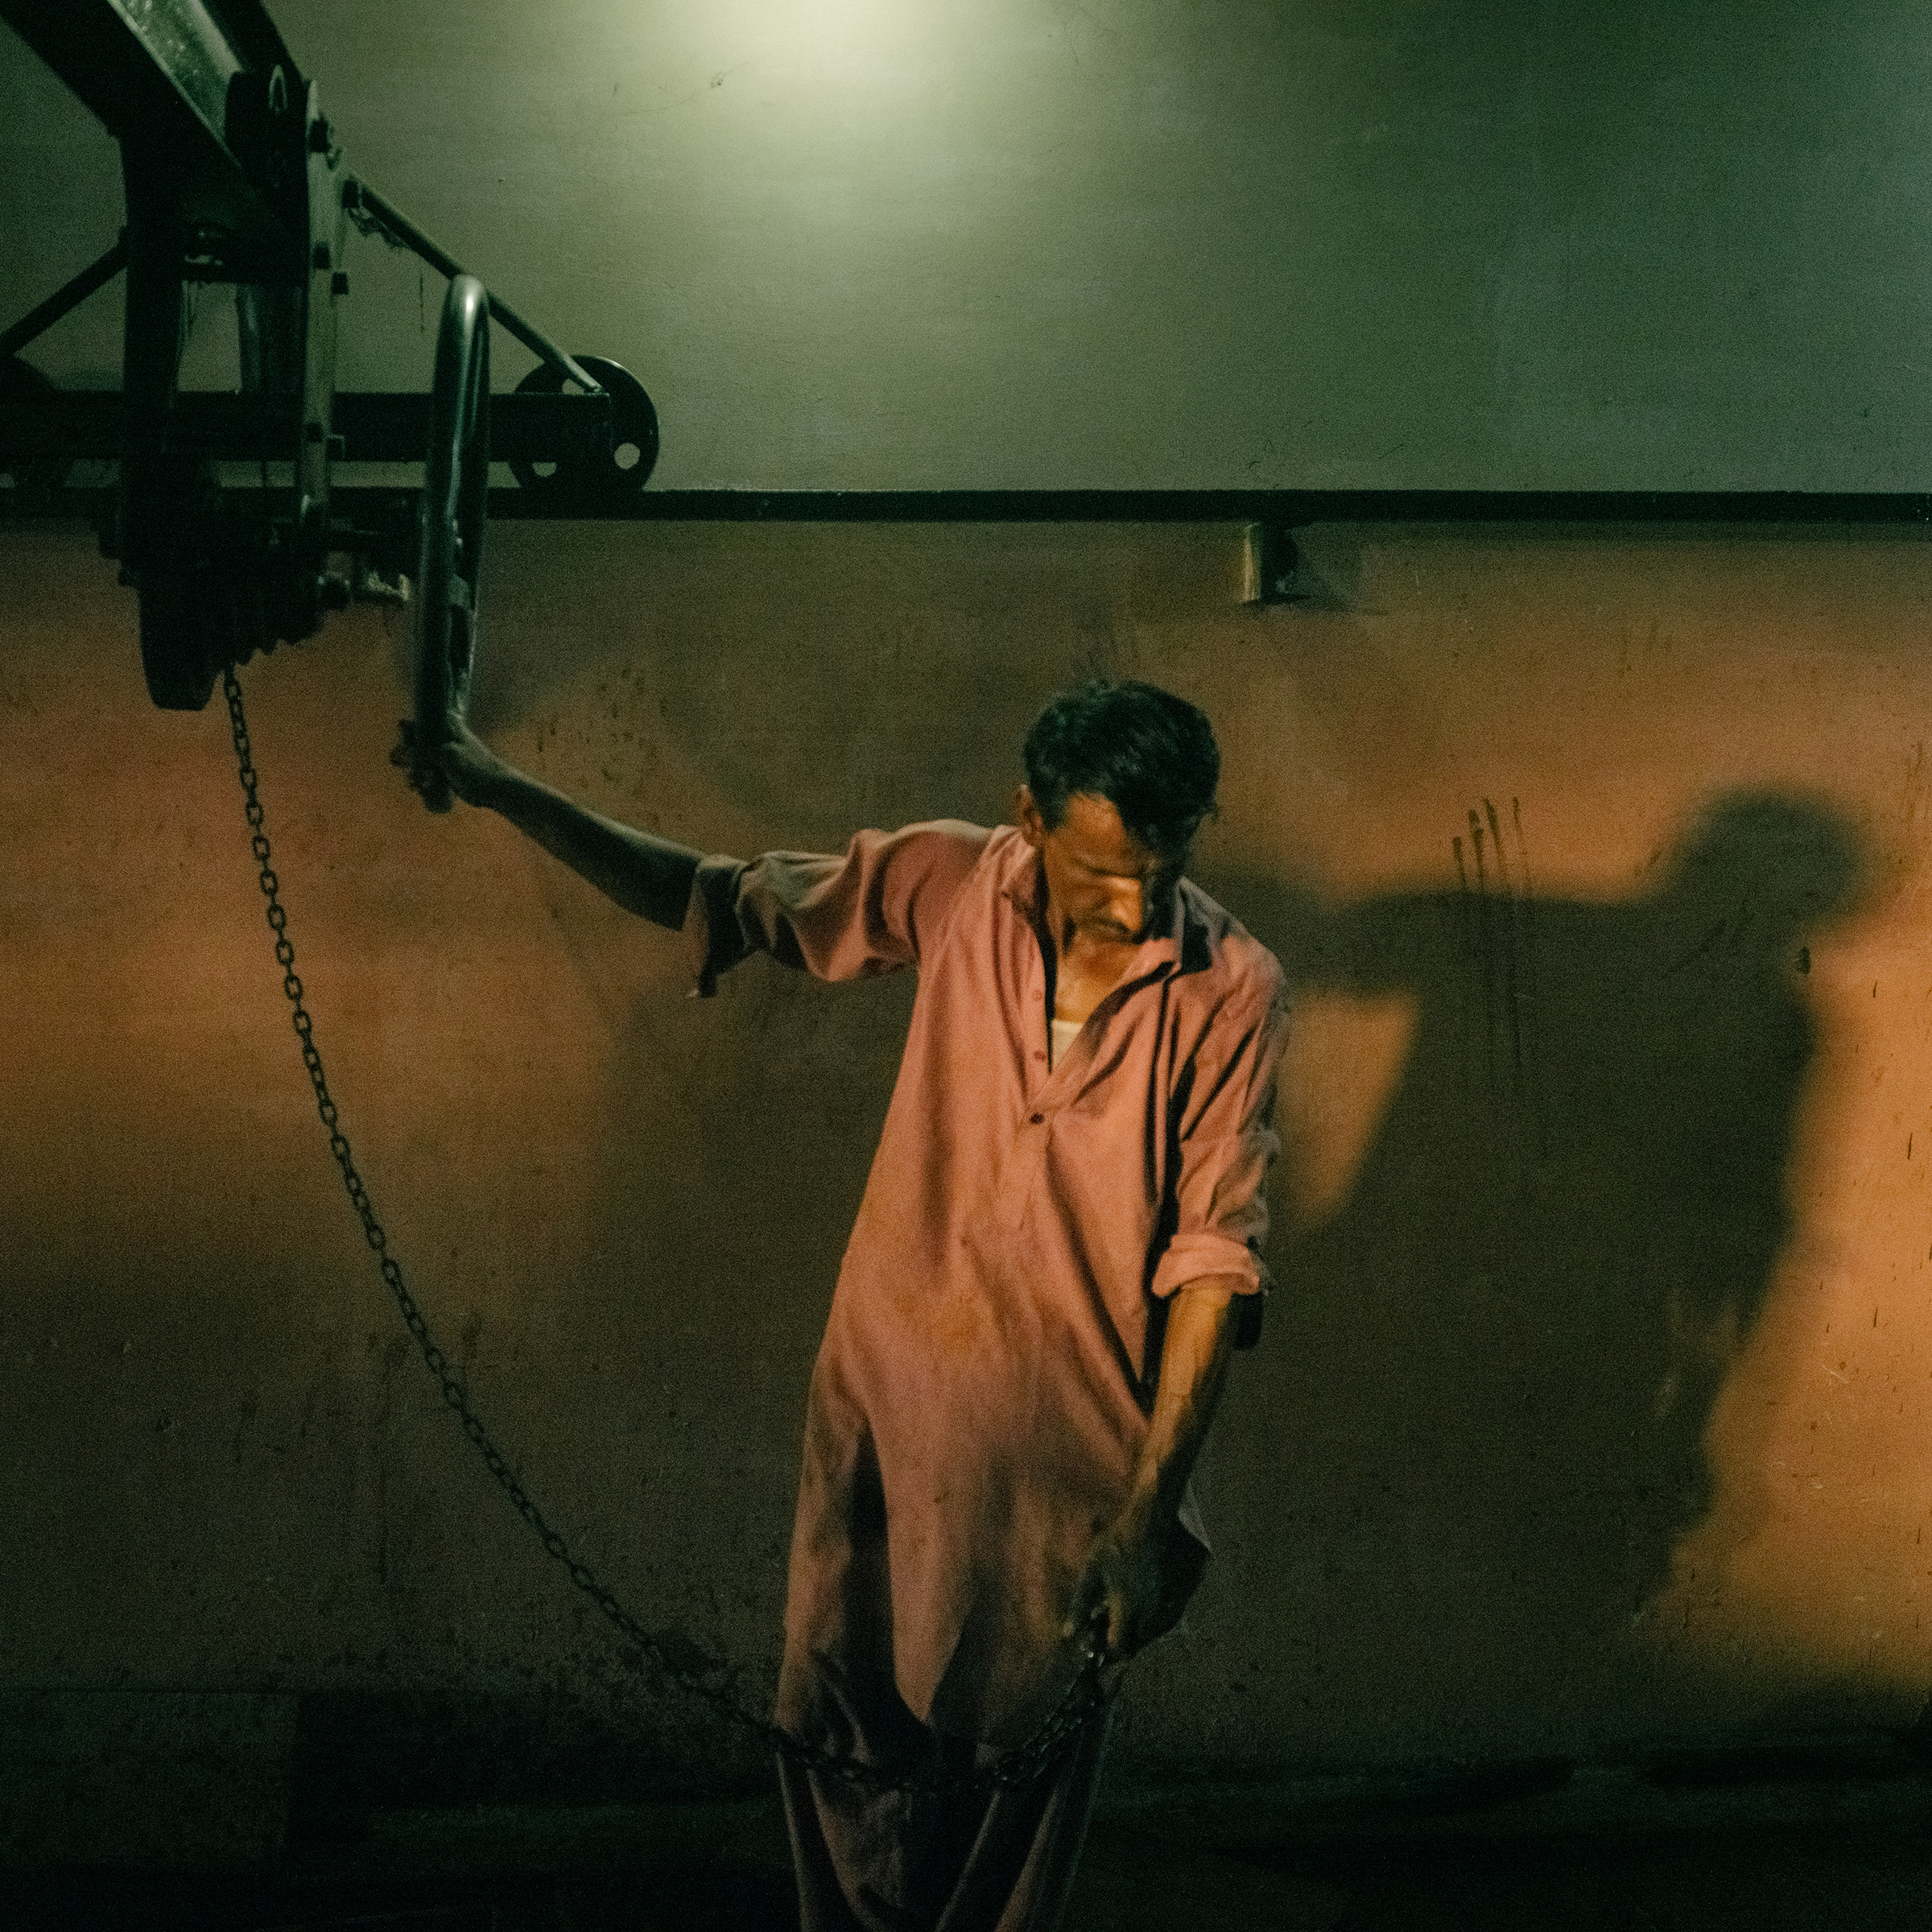 A worker moves an ice-lifting tool inside a factory on June 29.